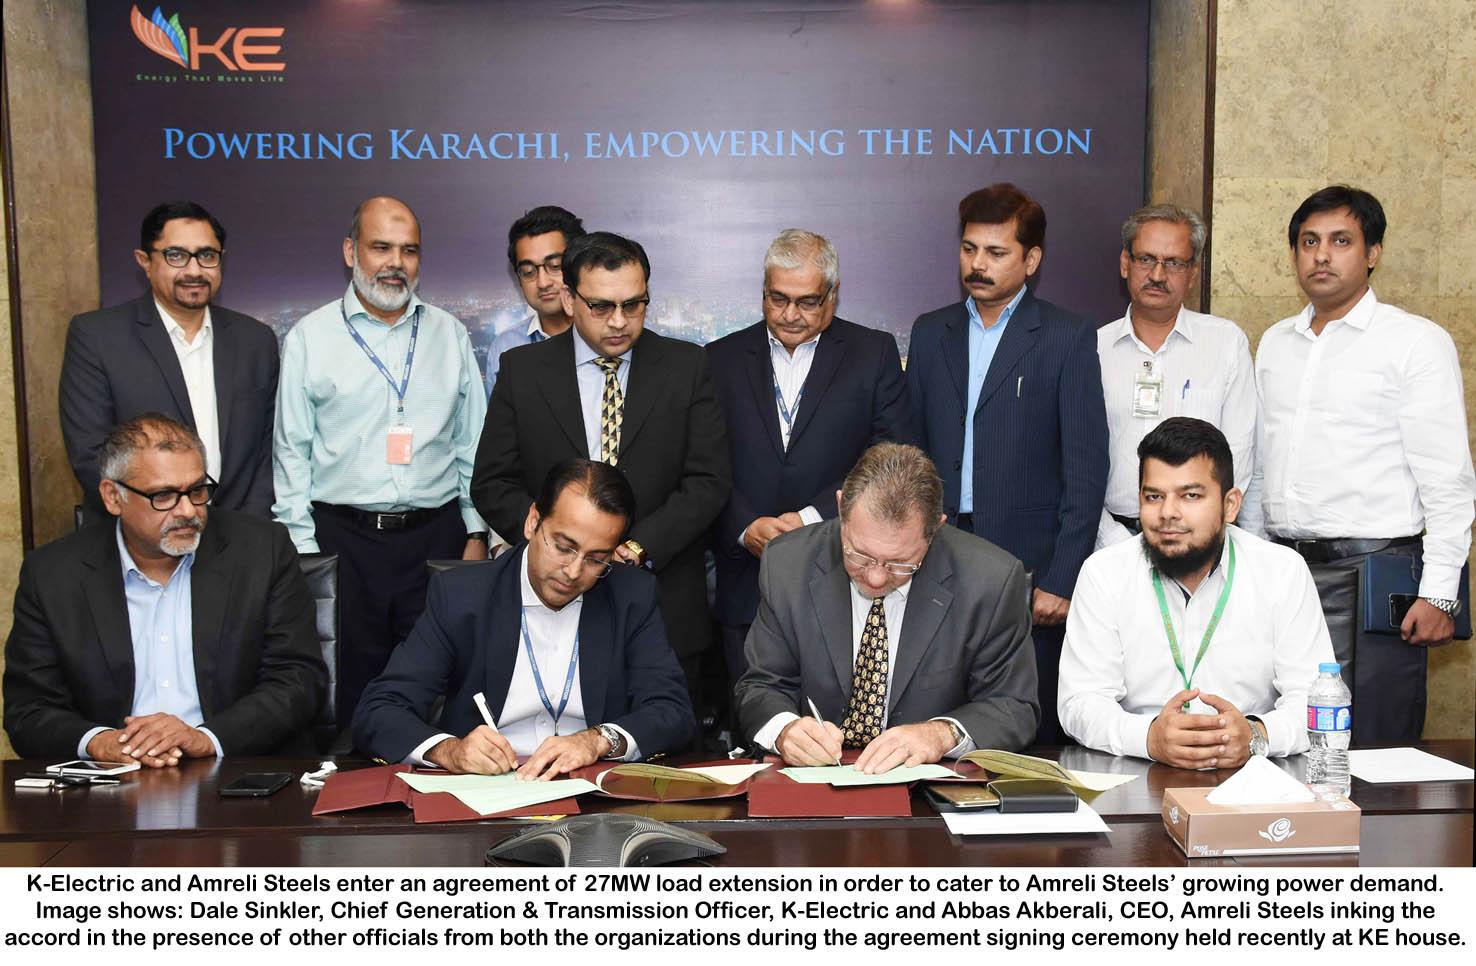 K-Electric and Amreli Steels Enter an Agreement of 27MW